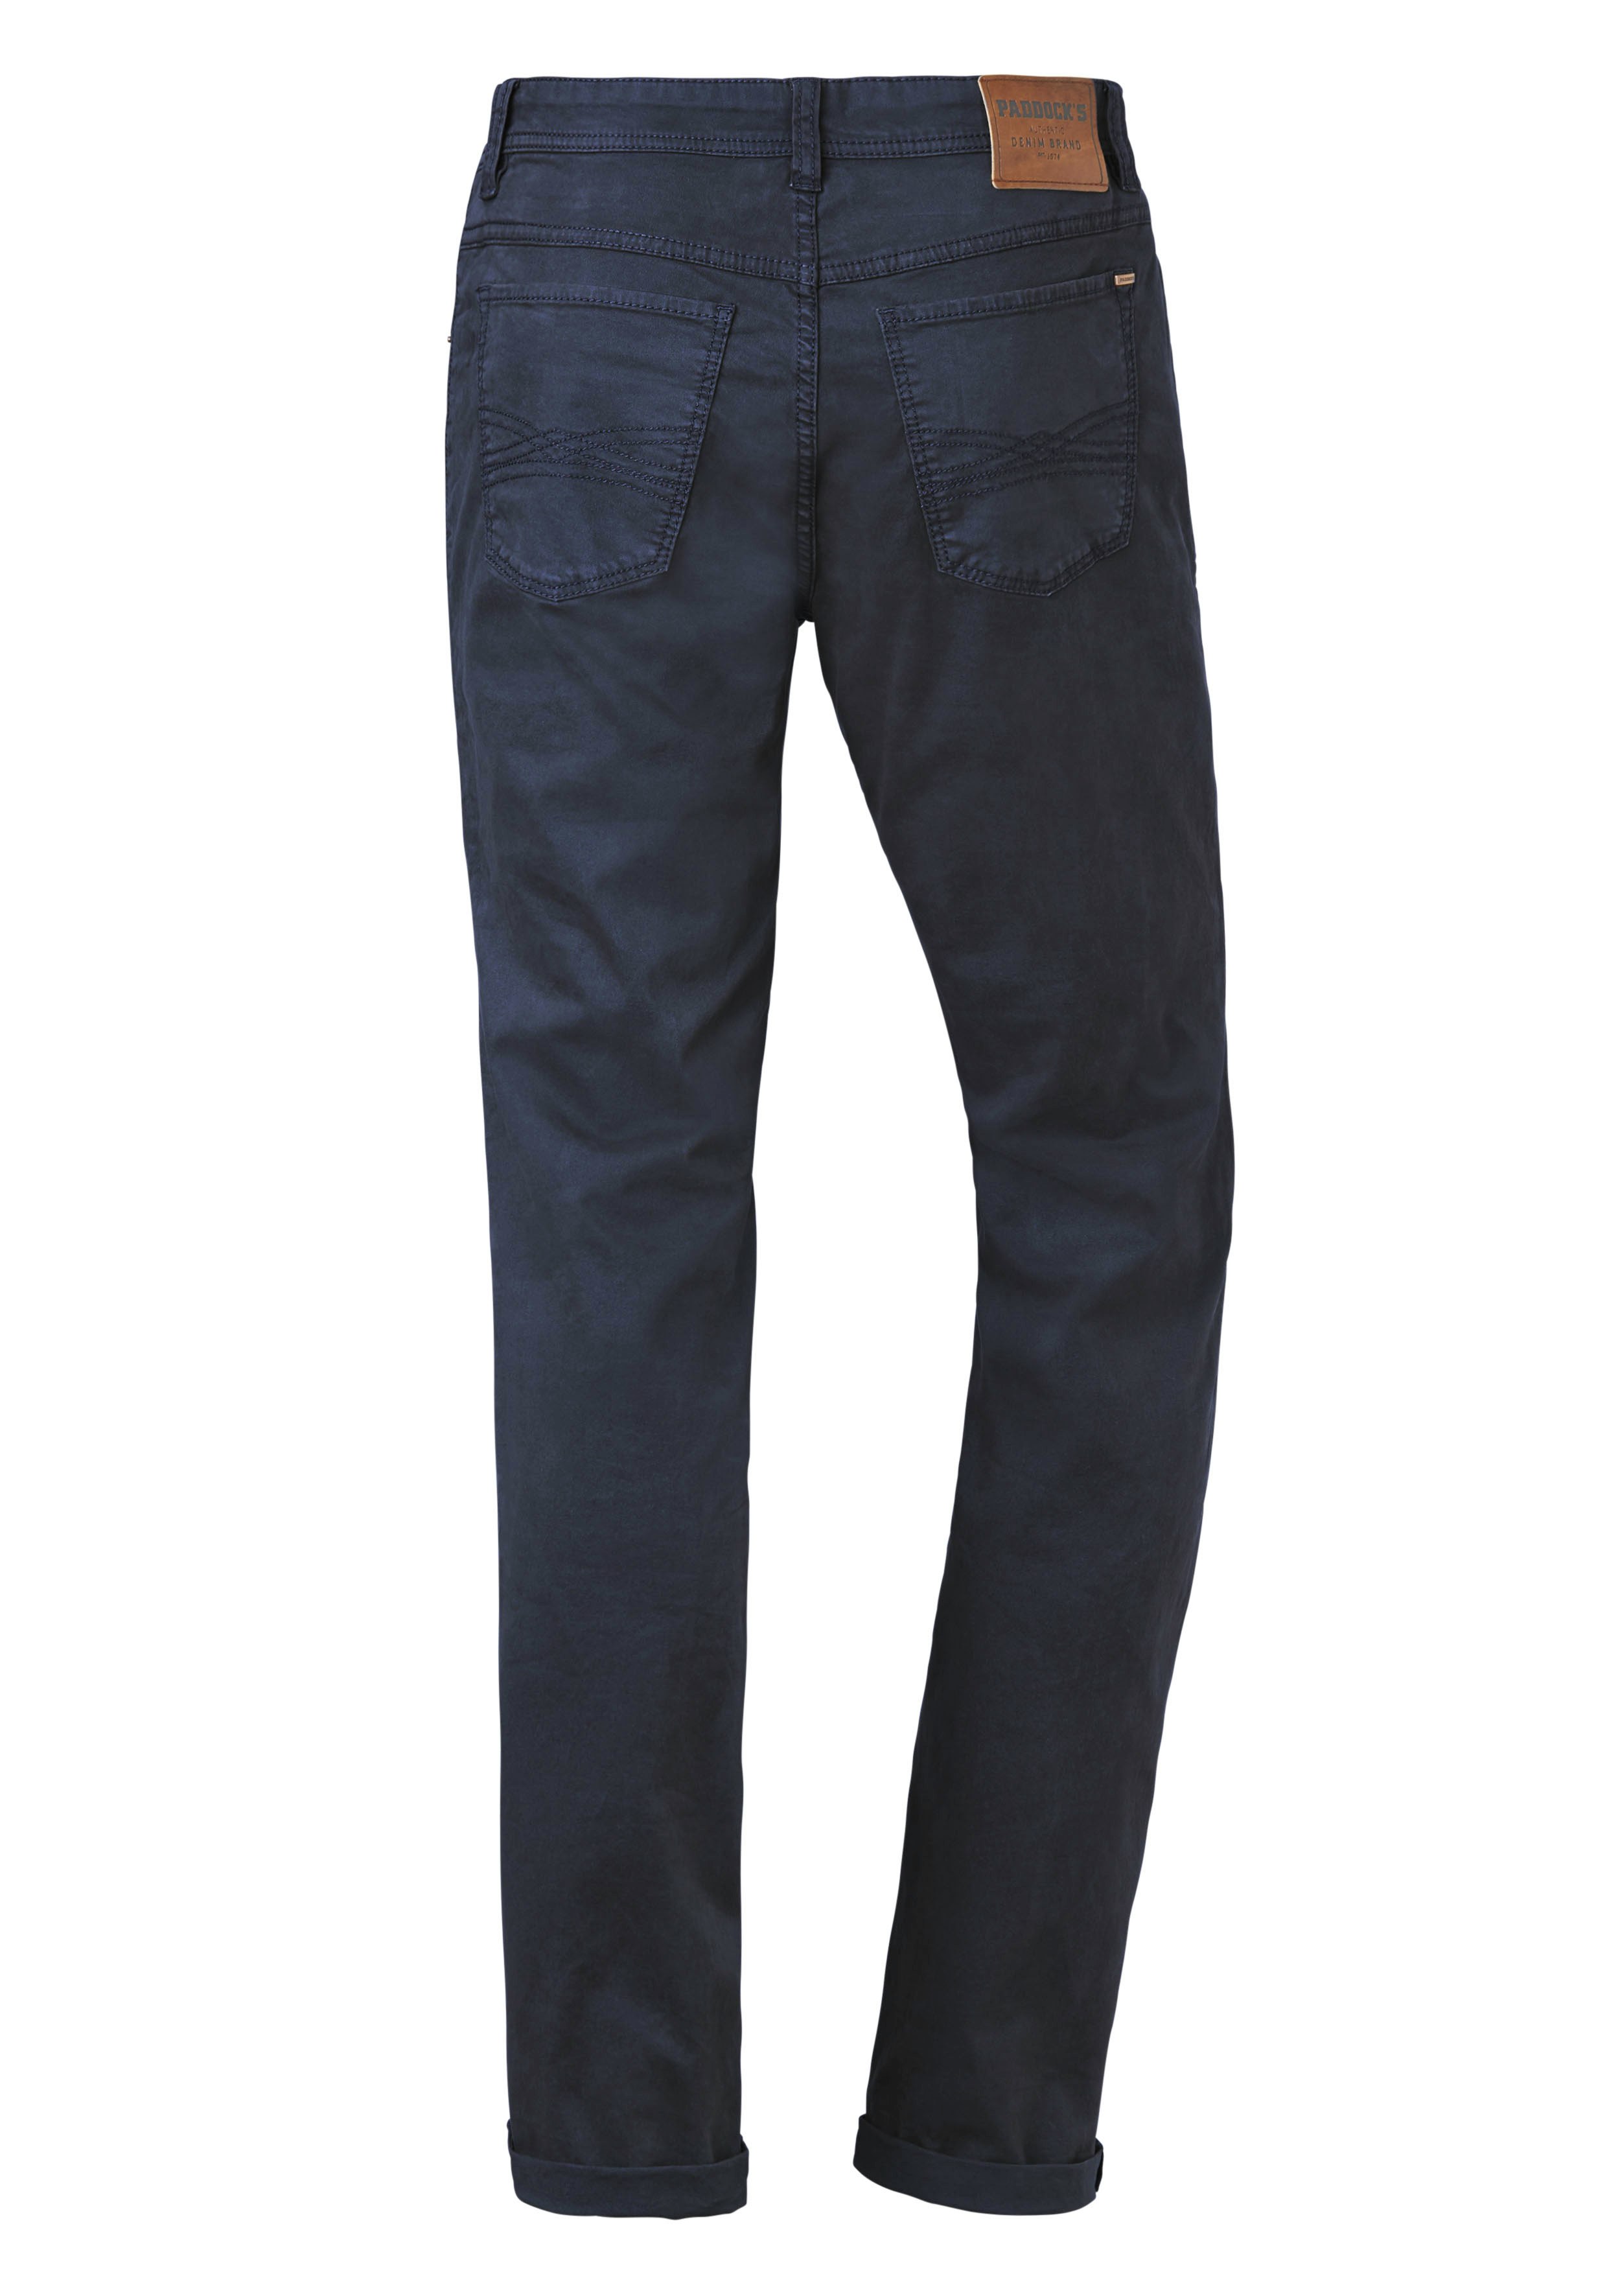 Paddock's Jeans Ranger Colored navy